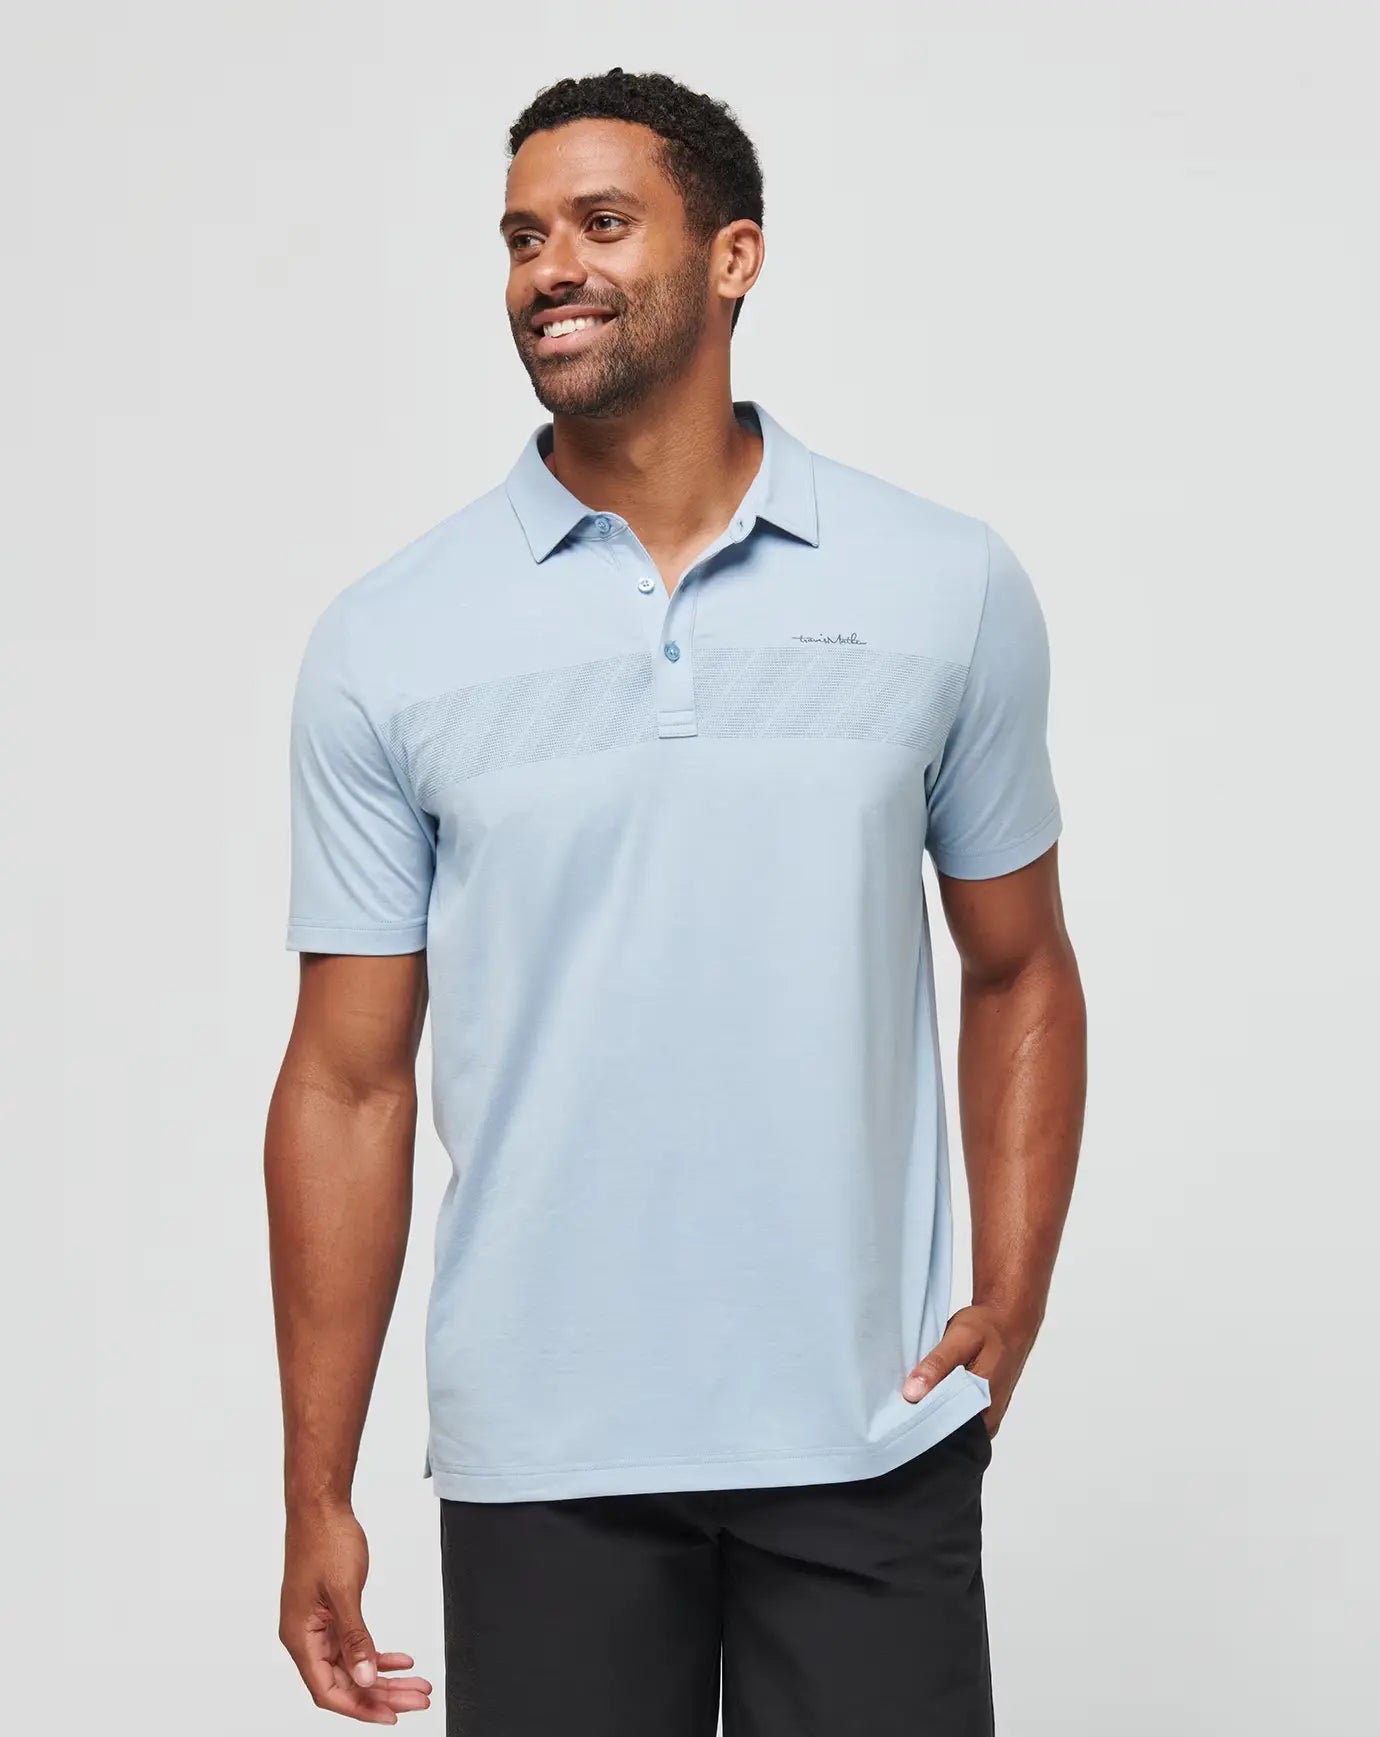 The Travis Mathew Jungle Pyramid Golf Polo in the color blue.